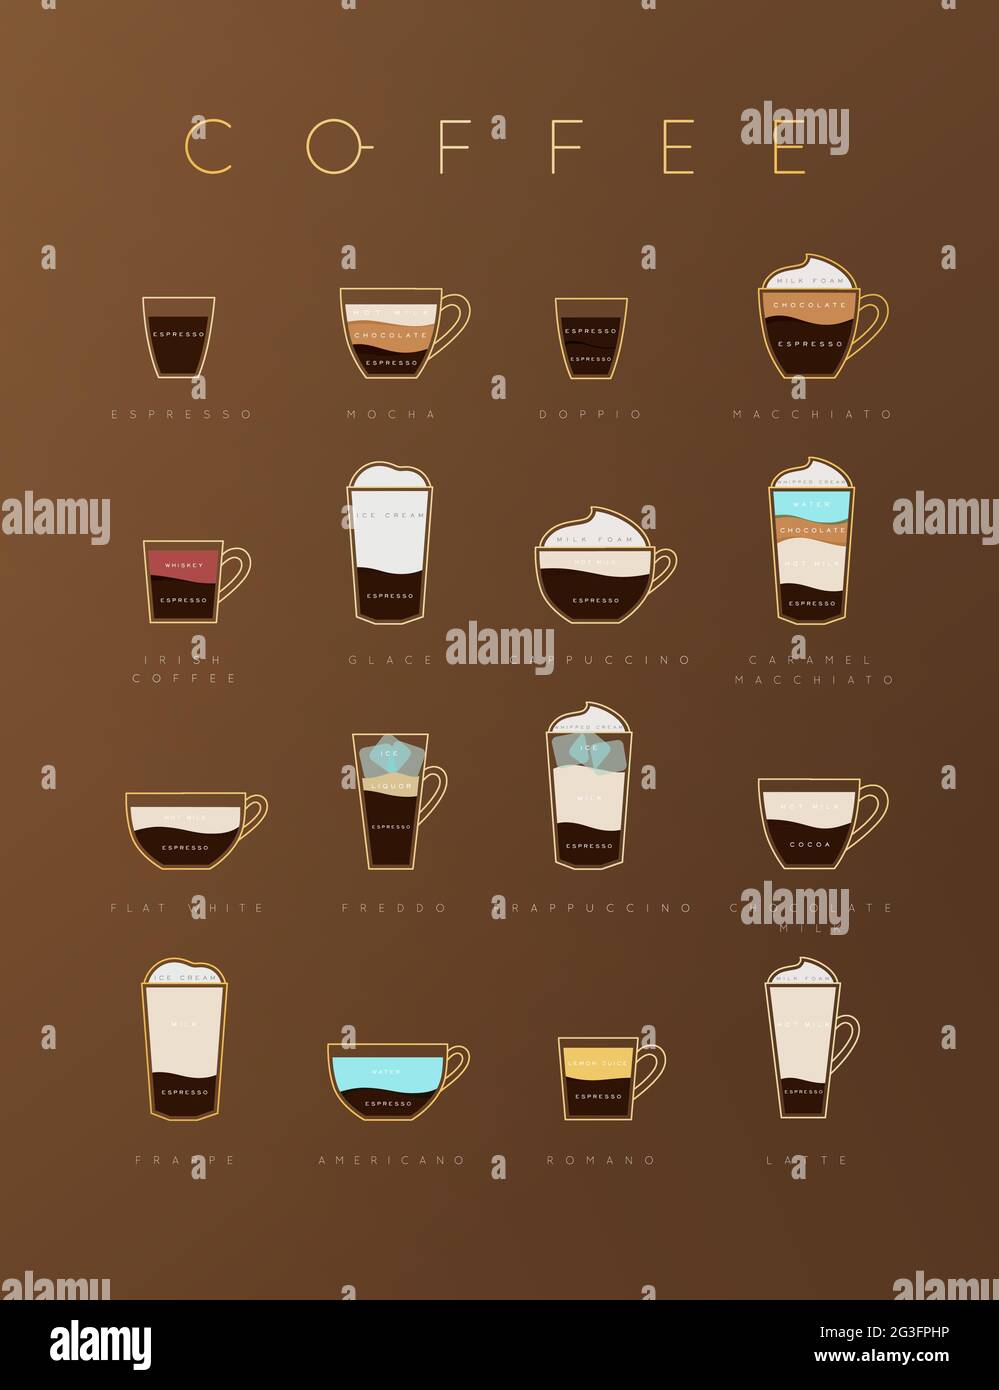 Poster flat coffee menu with cups, recipes and names of coffee drawing on brown background Stock Vector